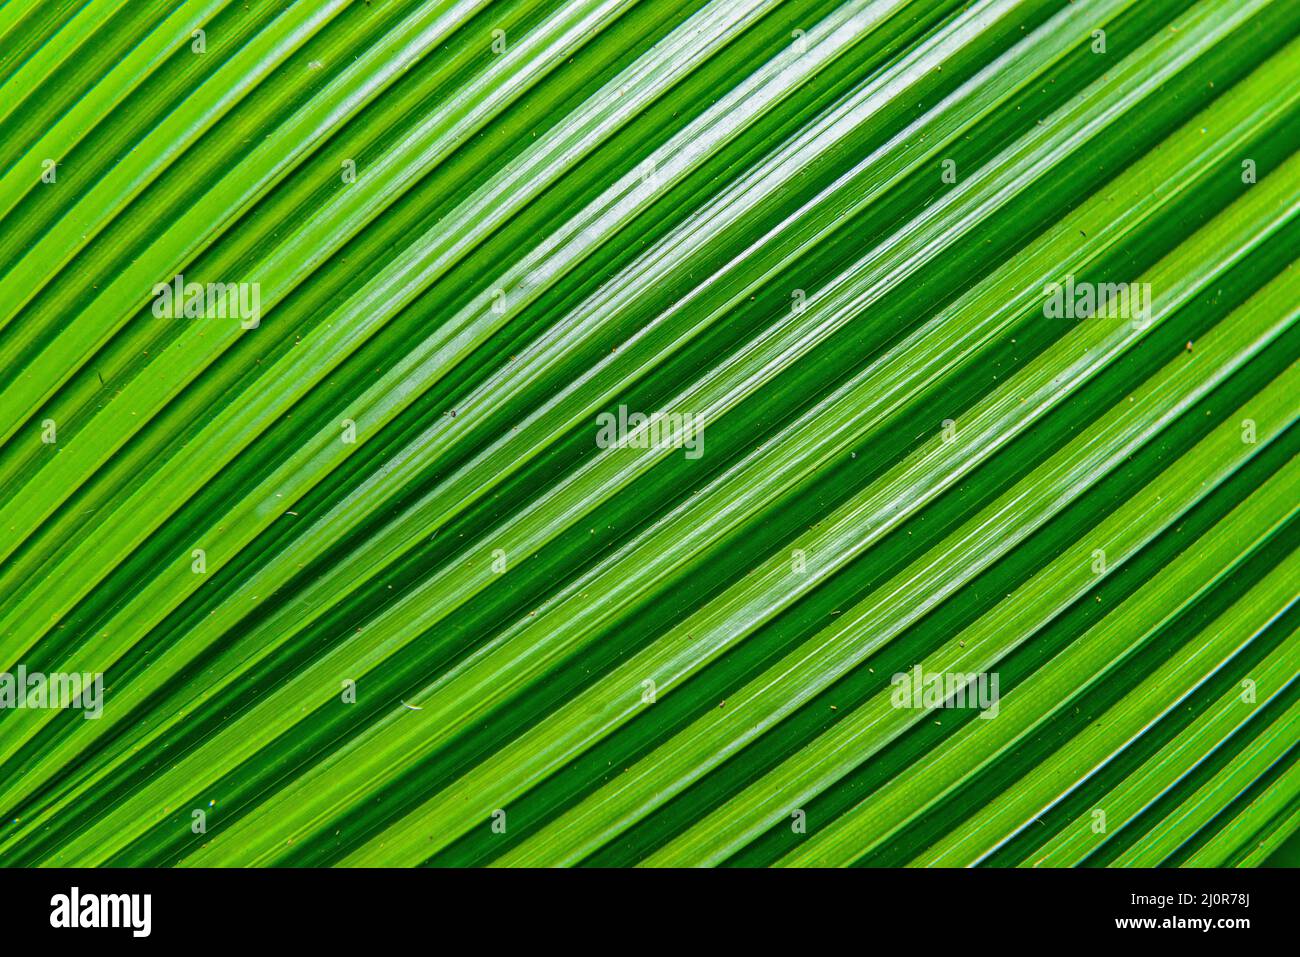 Extreme close up background texture of backlit green palm leaf veins Stock Photo